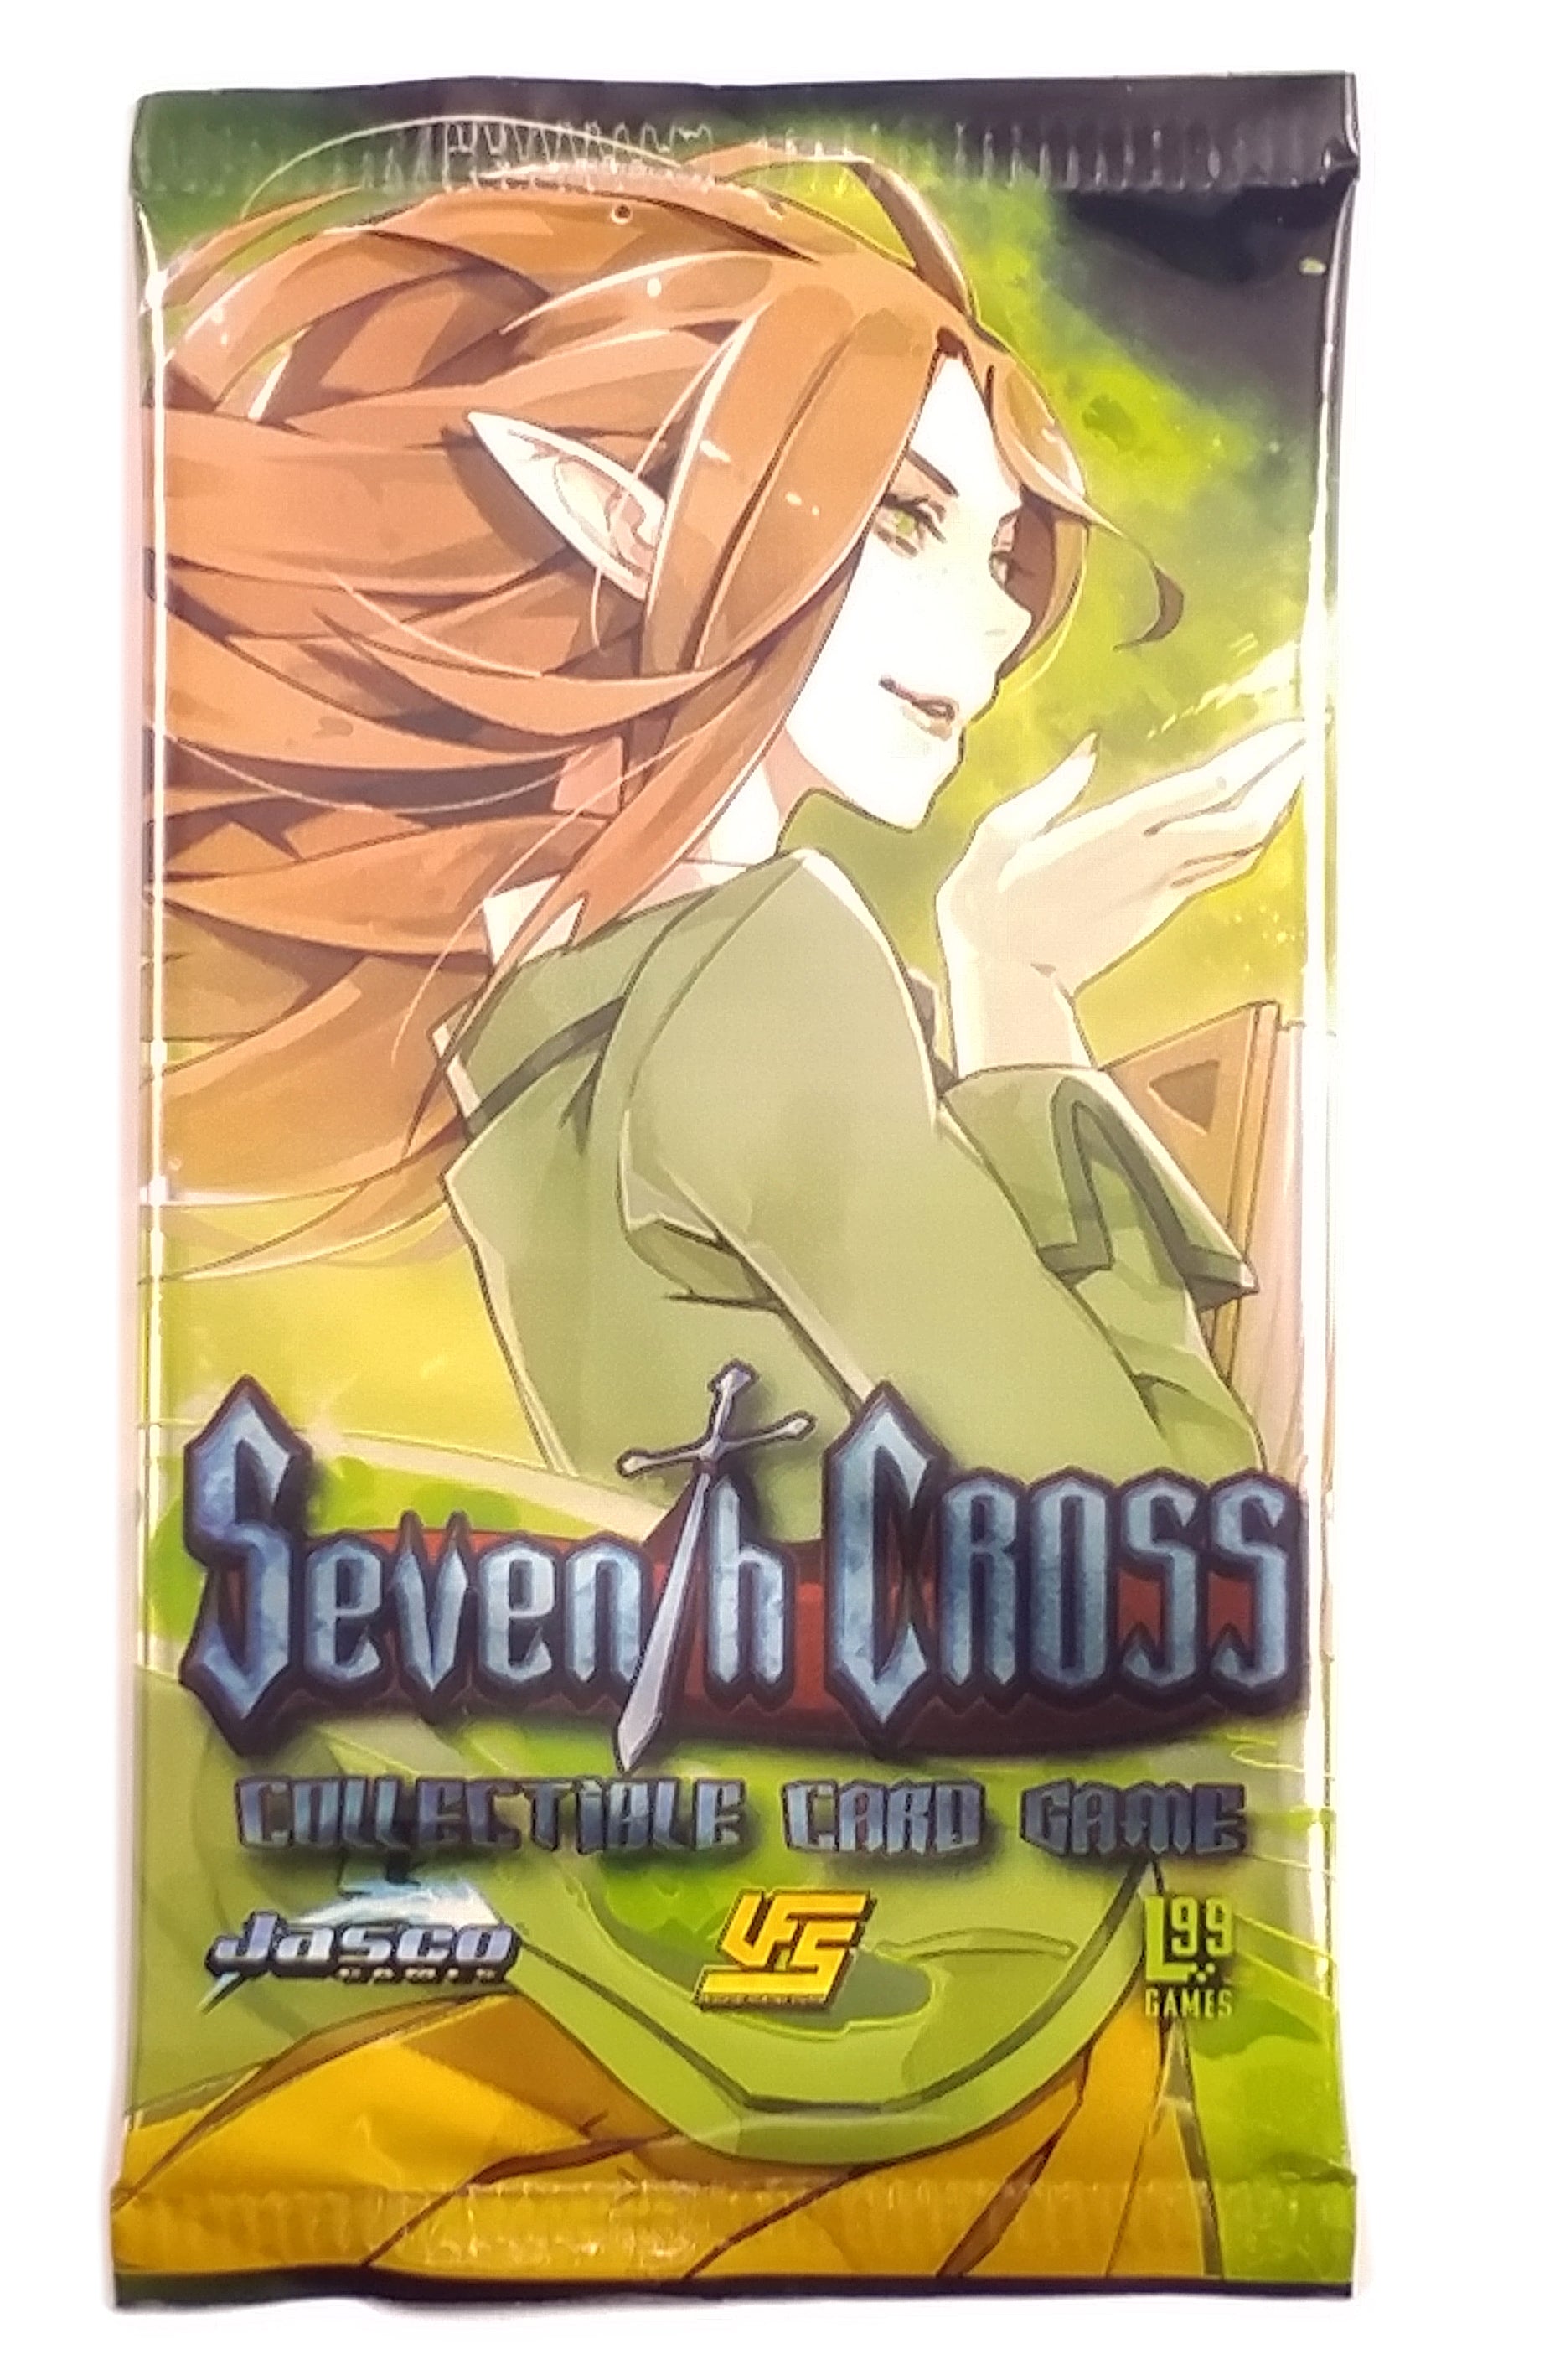 UFS Universal Fighting System TCG, Seventh Cross 1 Booster Pack